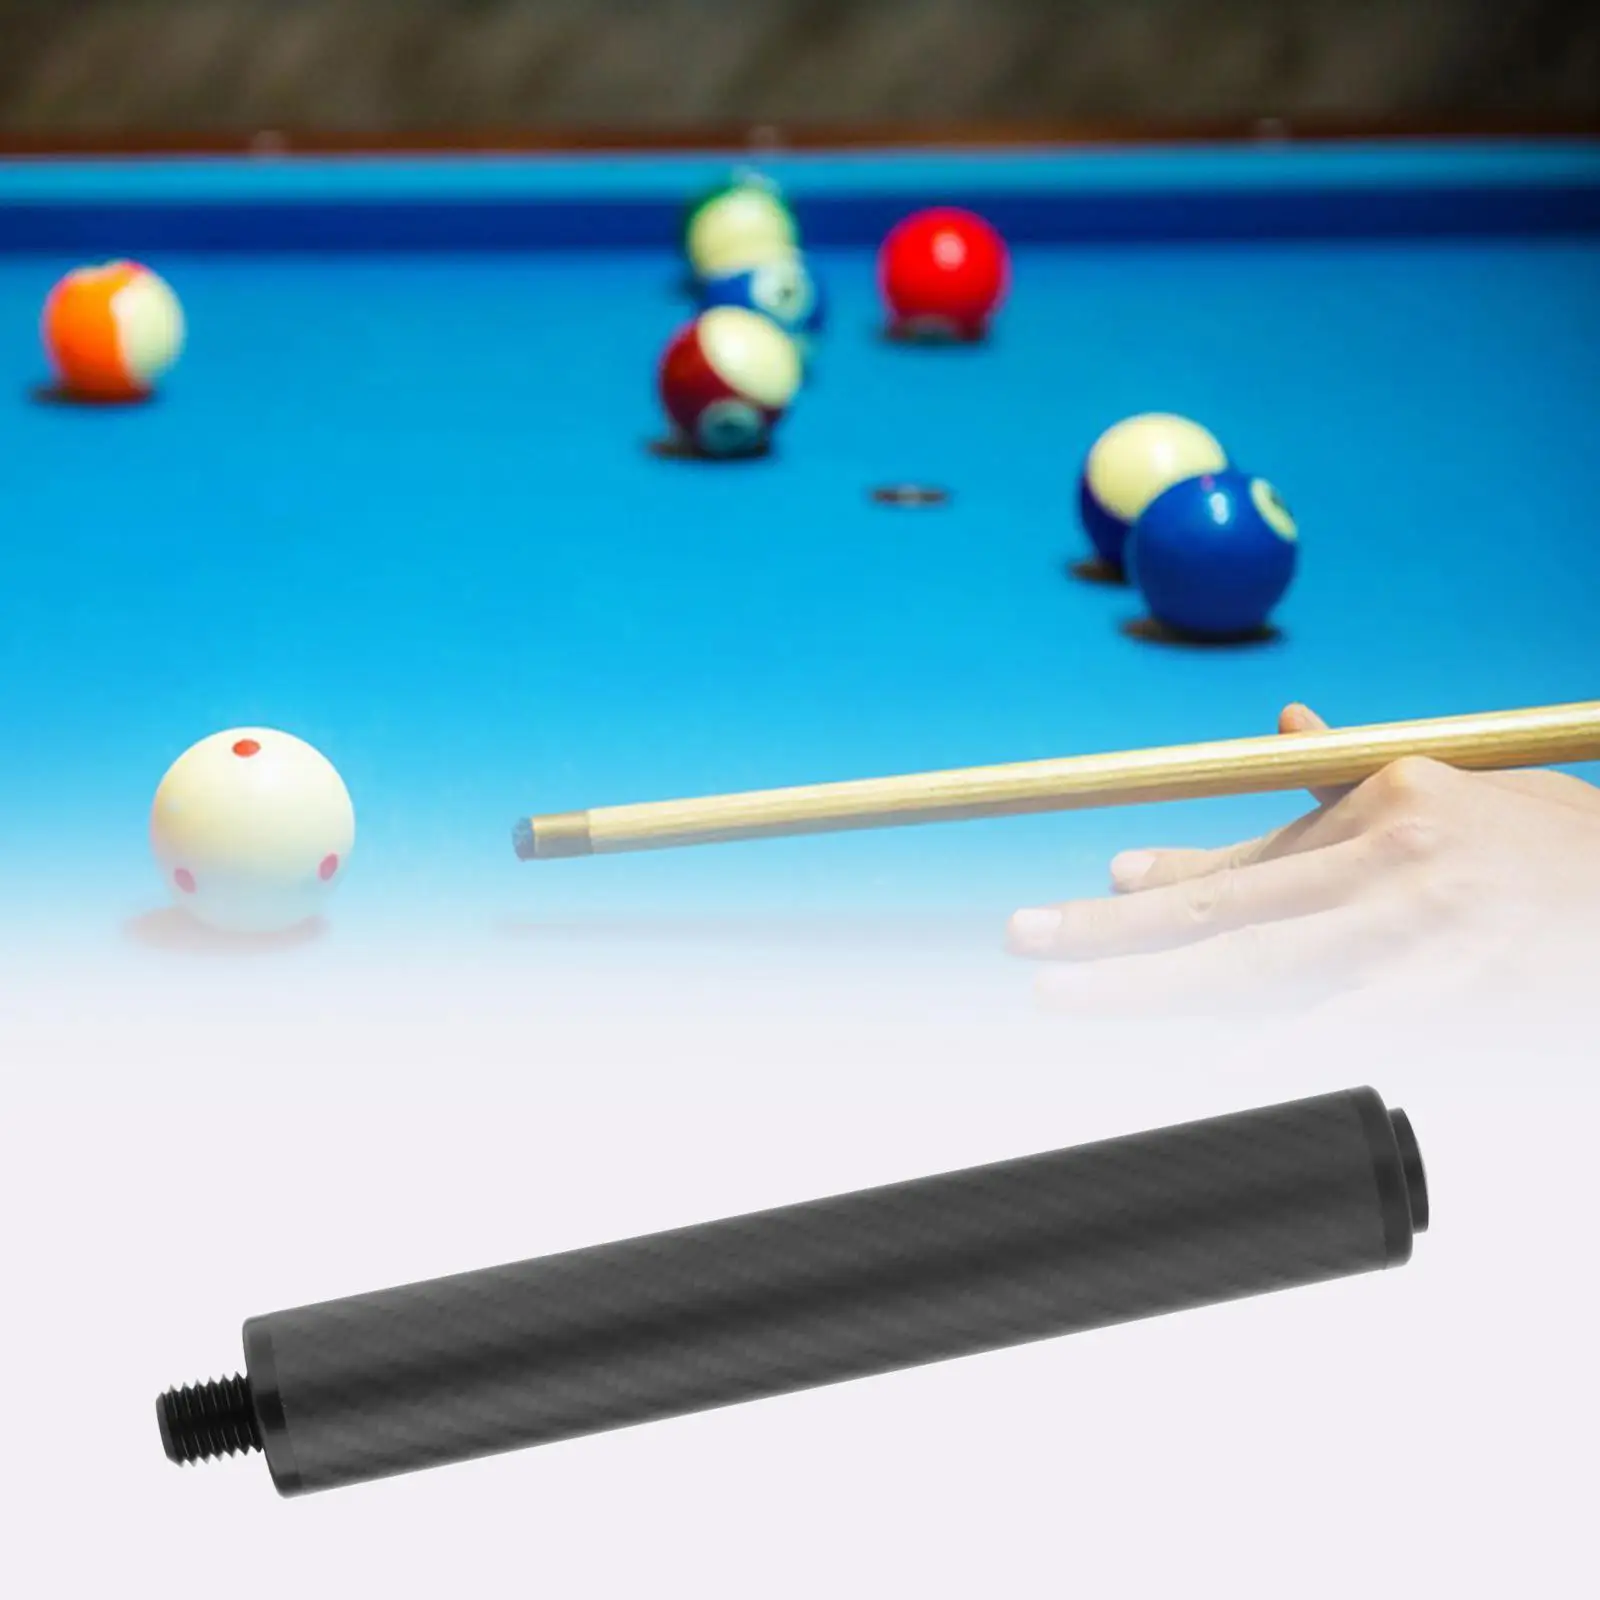 Pool Cue Extension, Billiard Cue Extension, Pool Accessories with ,